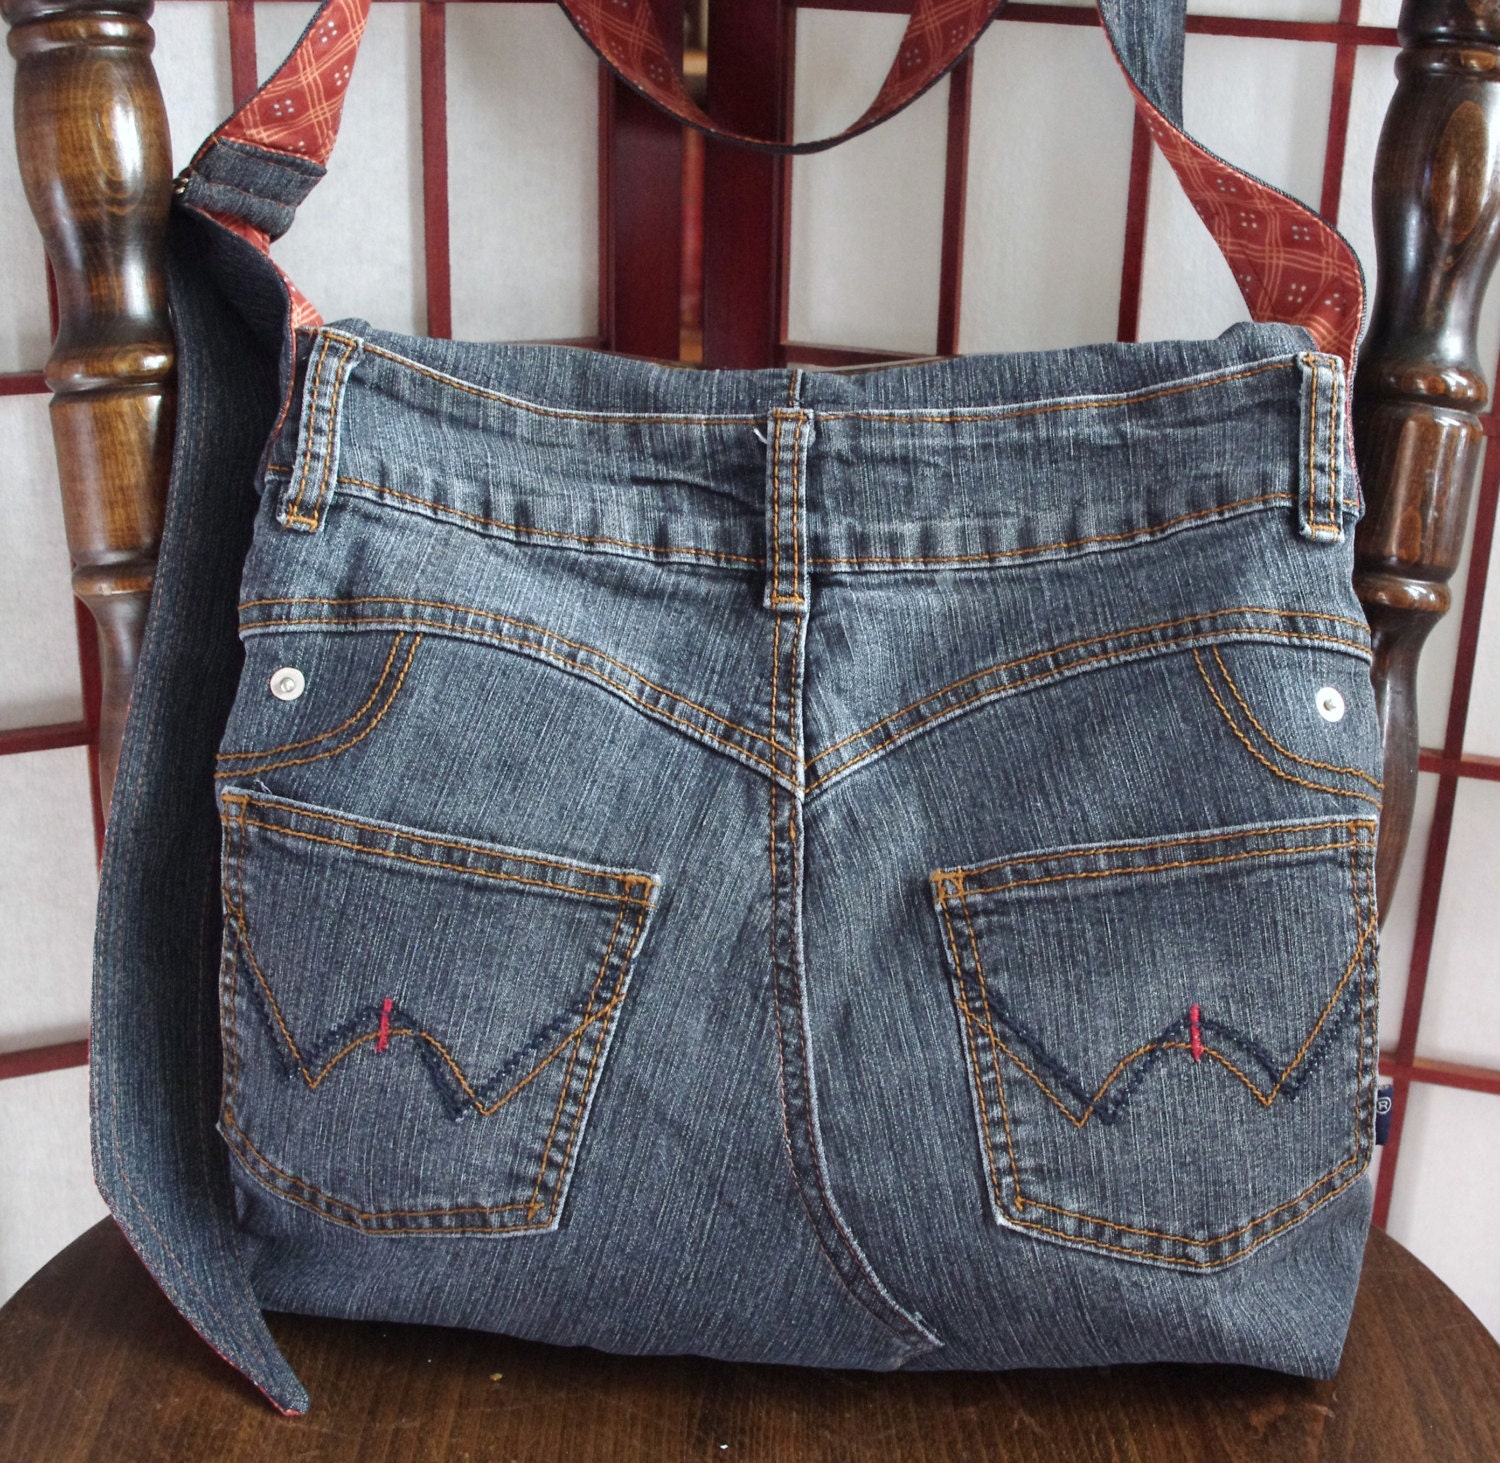 Recycled Denim Bag Upcycled Jeans Bag Denim Purse by Recreatives